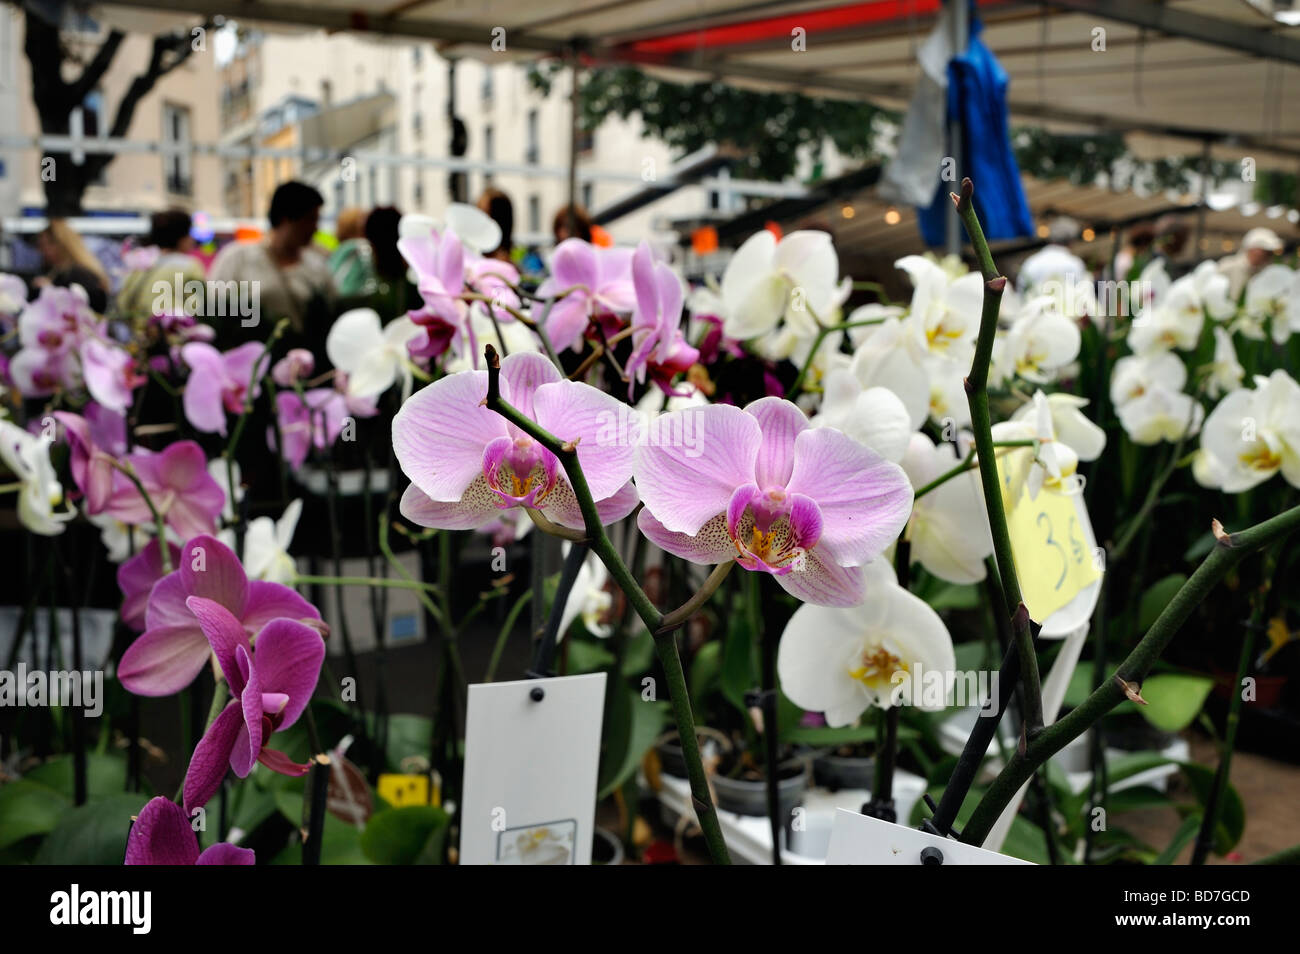 Paris France, Shopping in Outside Public "Flower Market" Stall, Display, Orchids "Potted Plants" Stock Photo